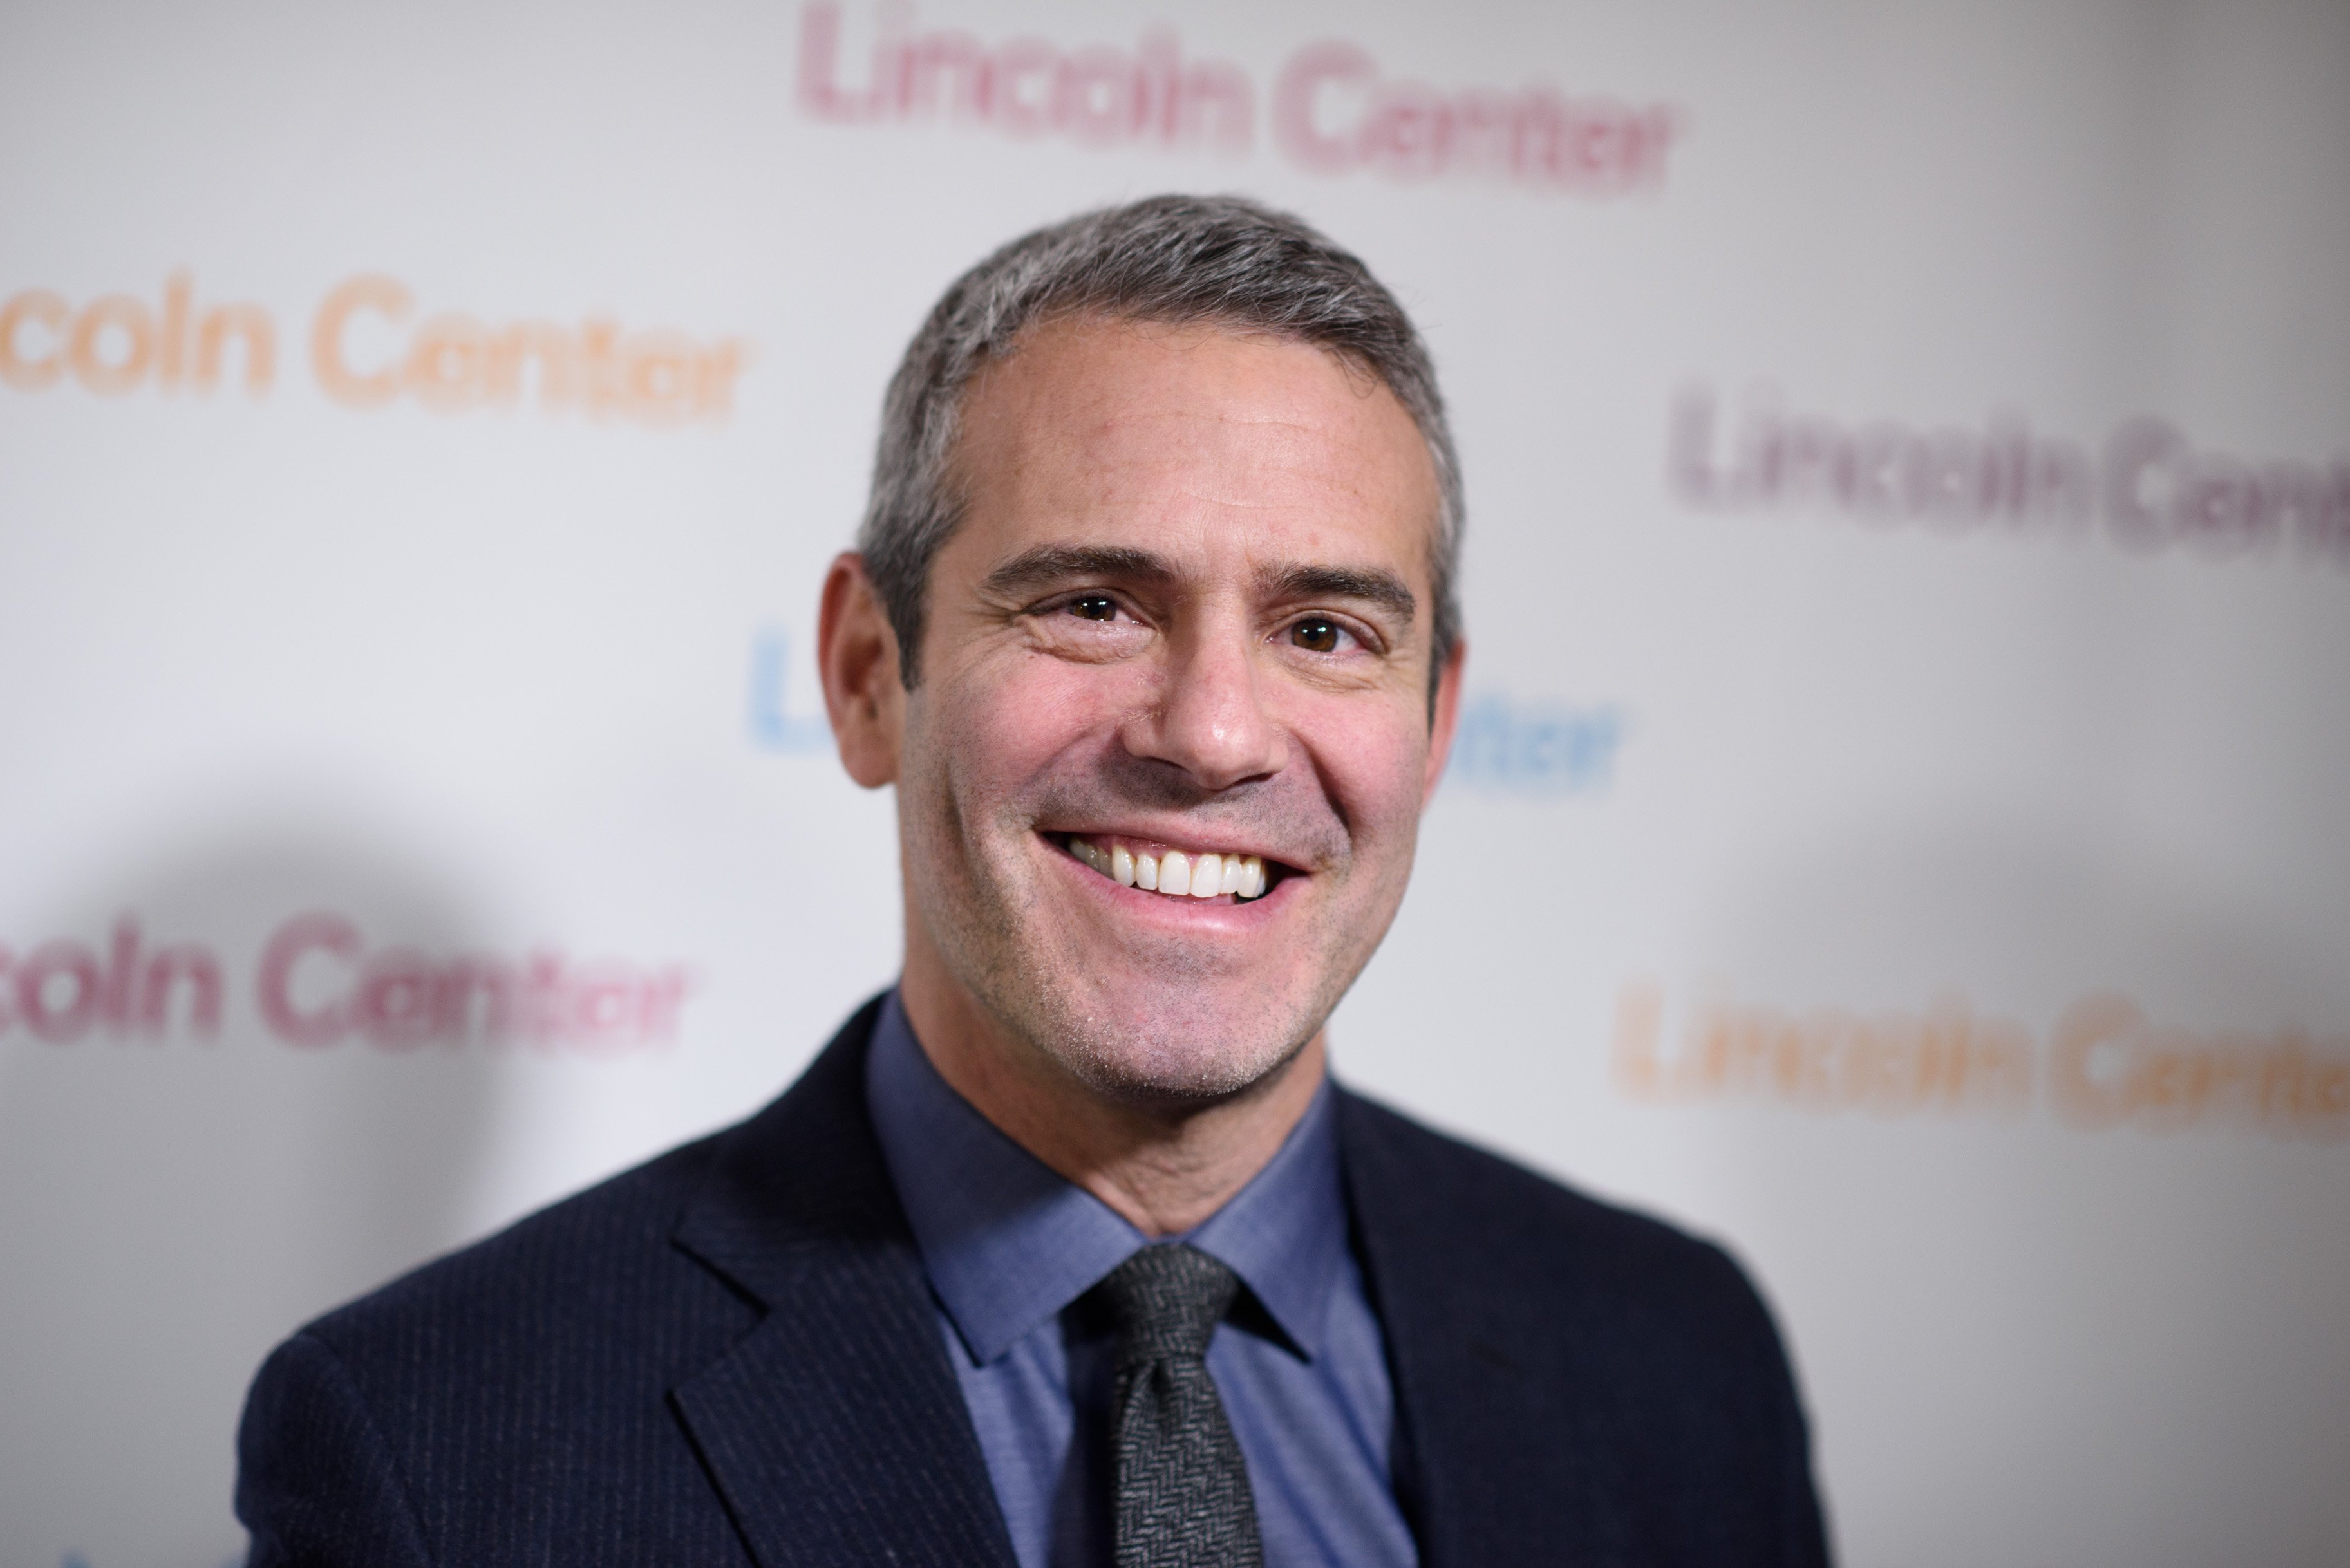  Andy Cohen arrives at Lincoln Center's American Songbook Gala Honors Lorne Michaels at Lincoln Center for the Performing Arts on February 11, 2016 in New York City | Source: Getty Images